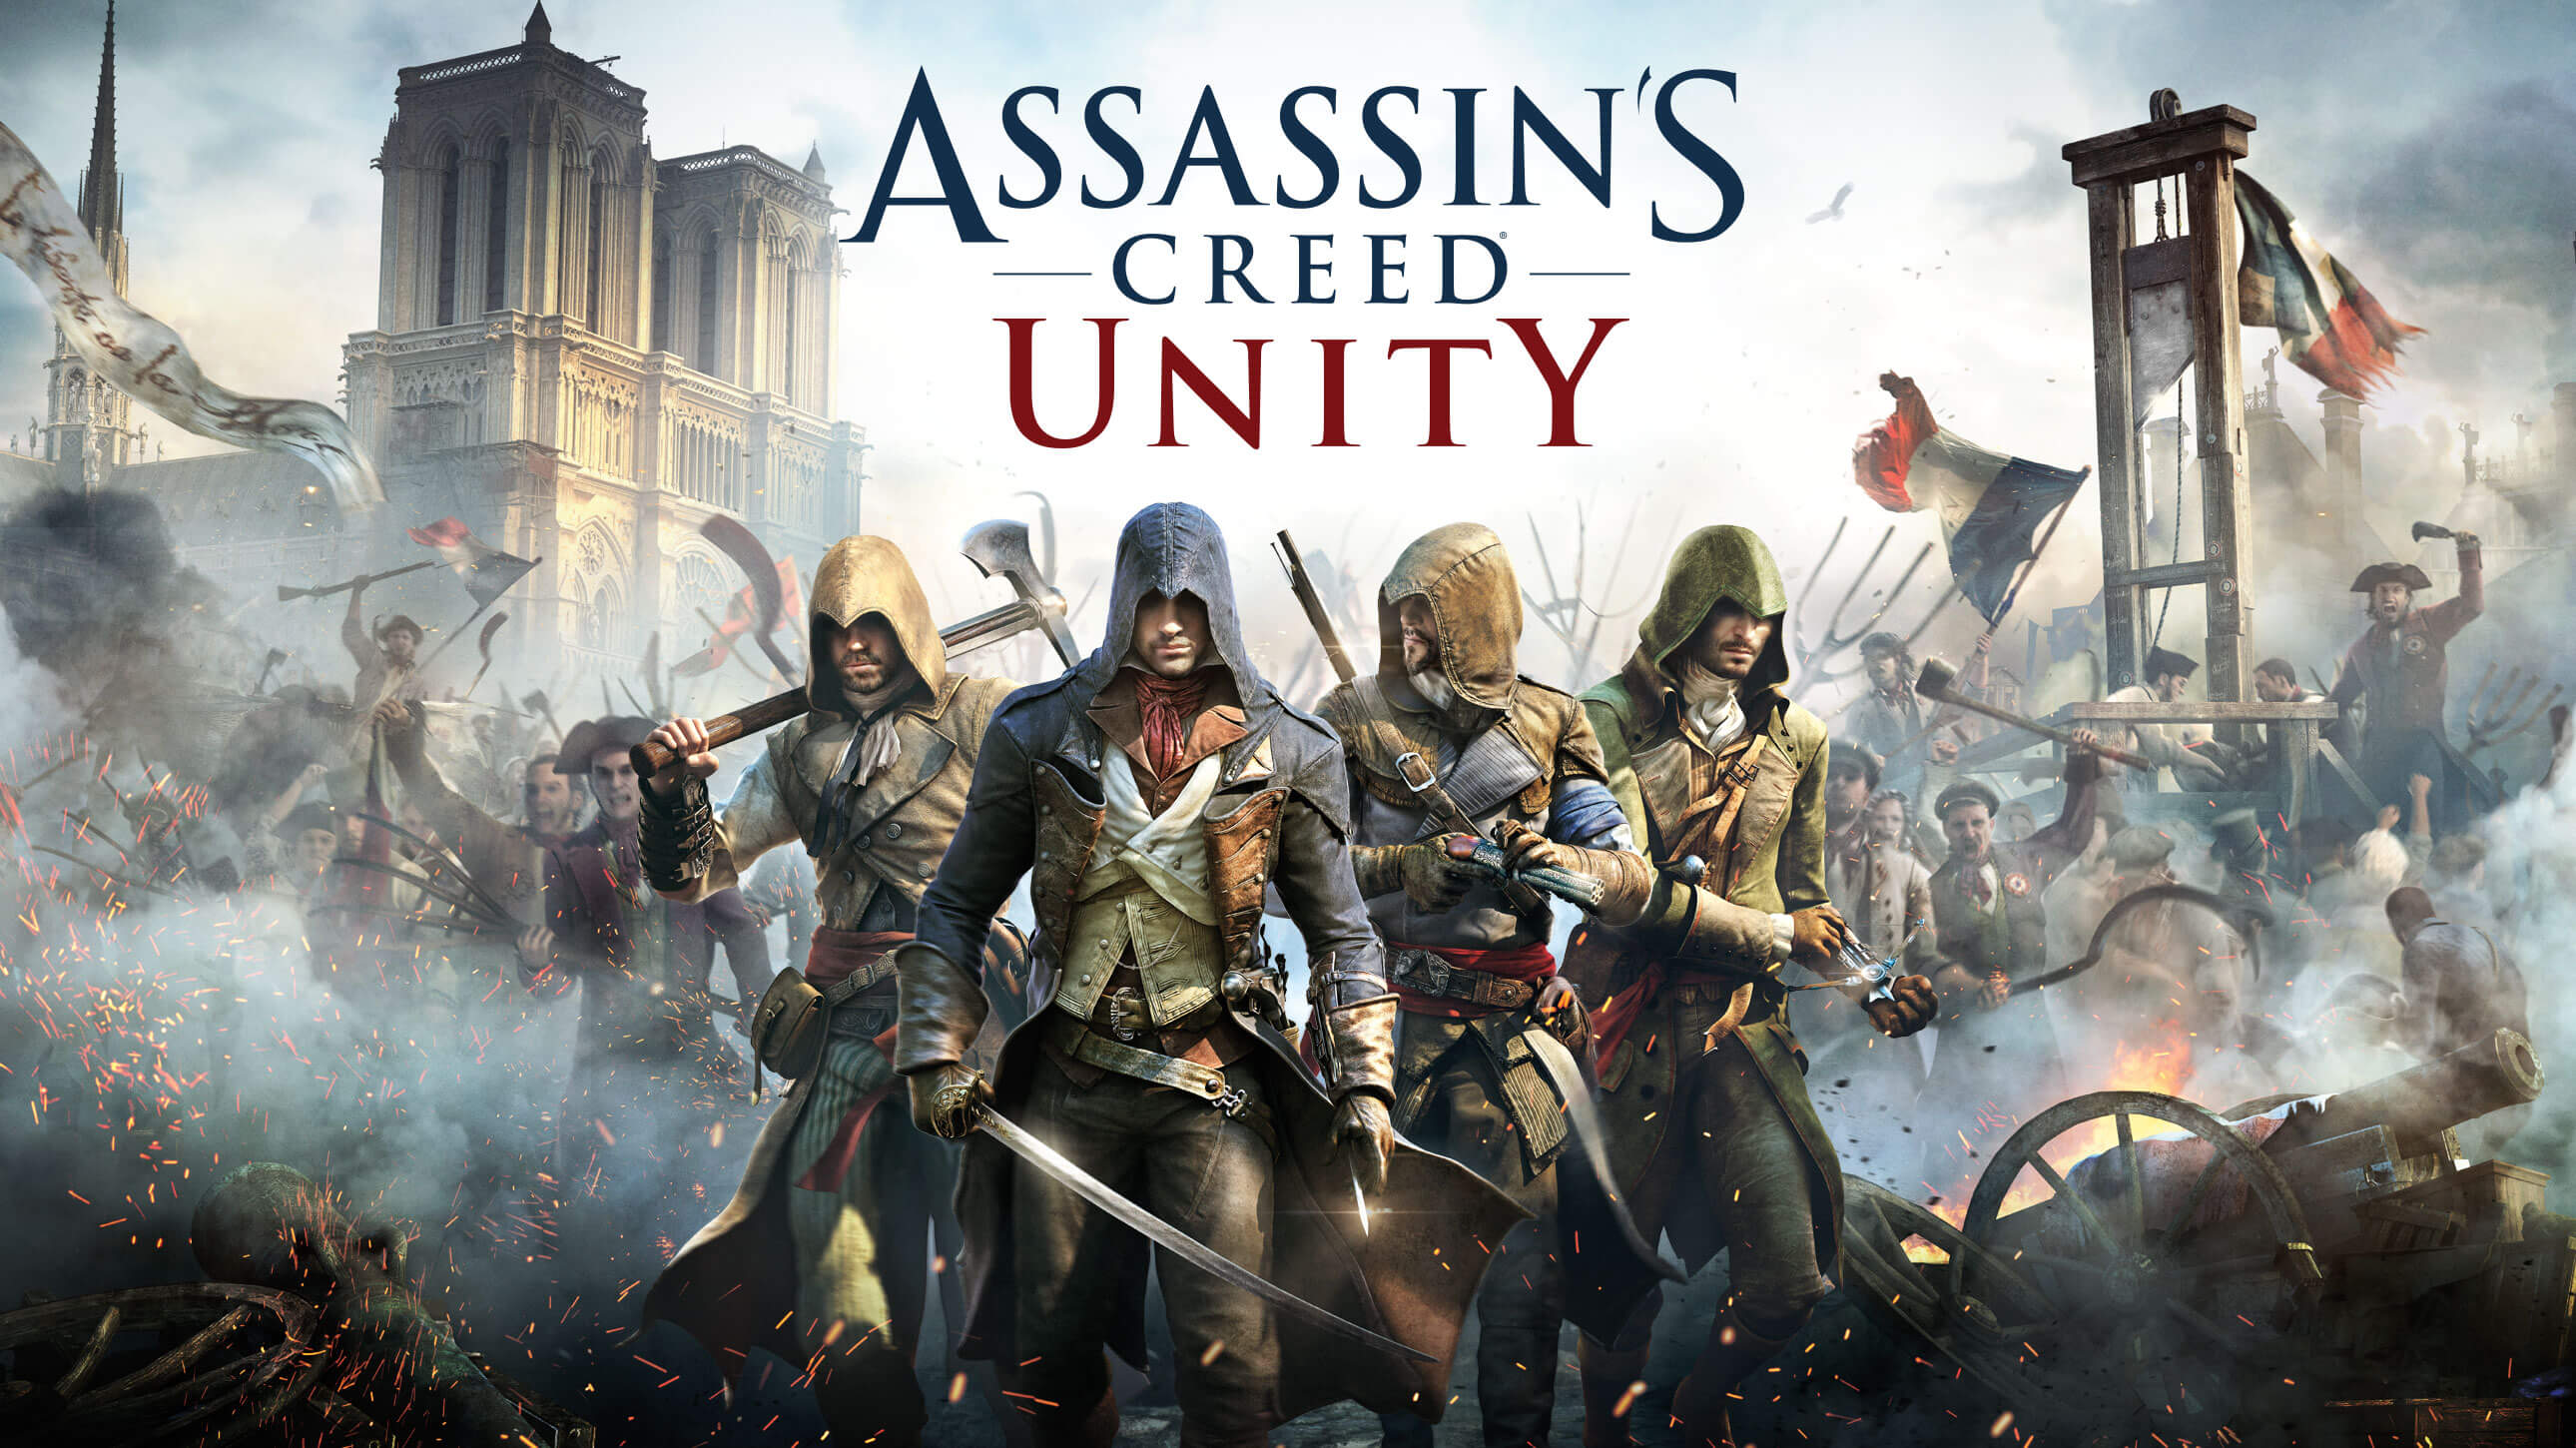 Assassin's Creed Unity Modded Save PS4/PS5 – Infinity Creation Store